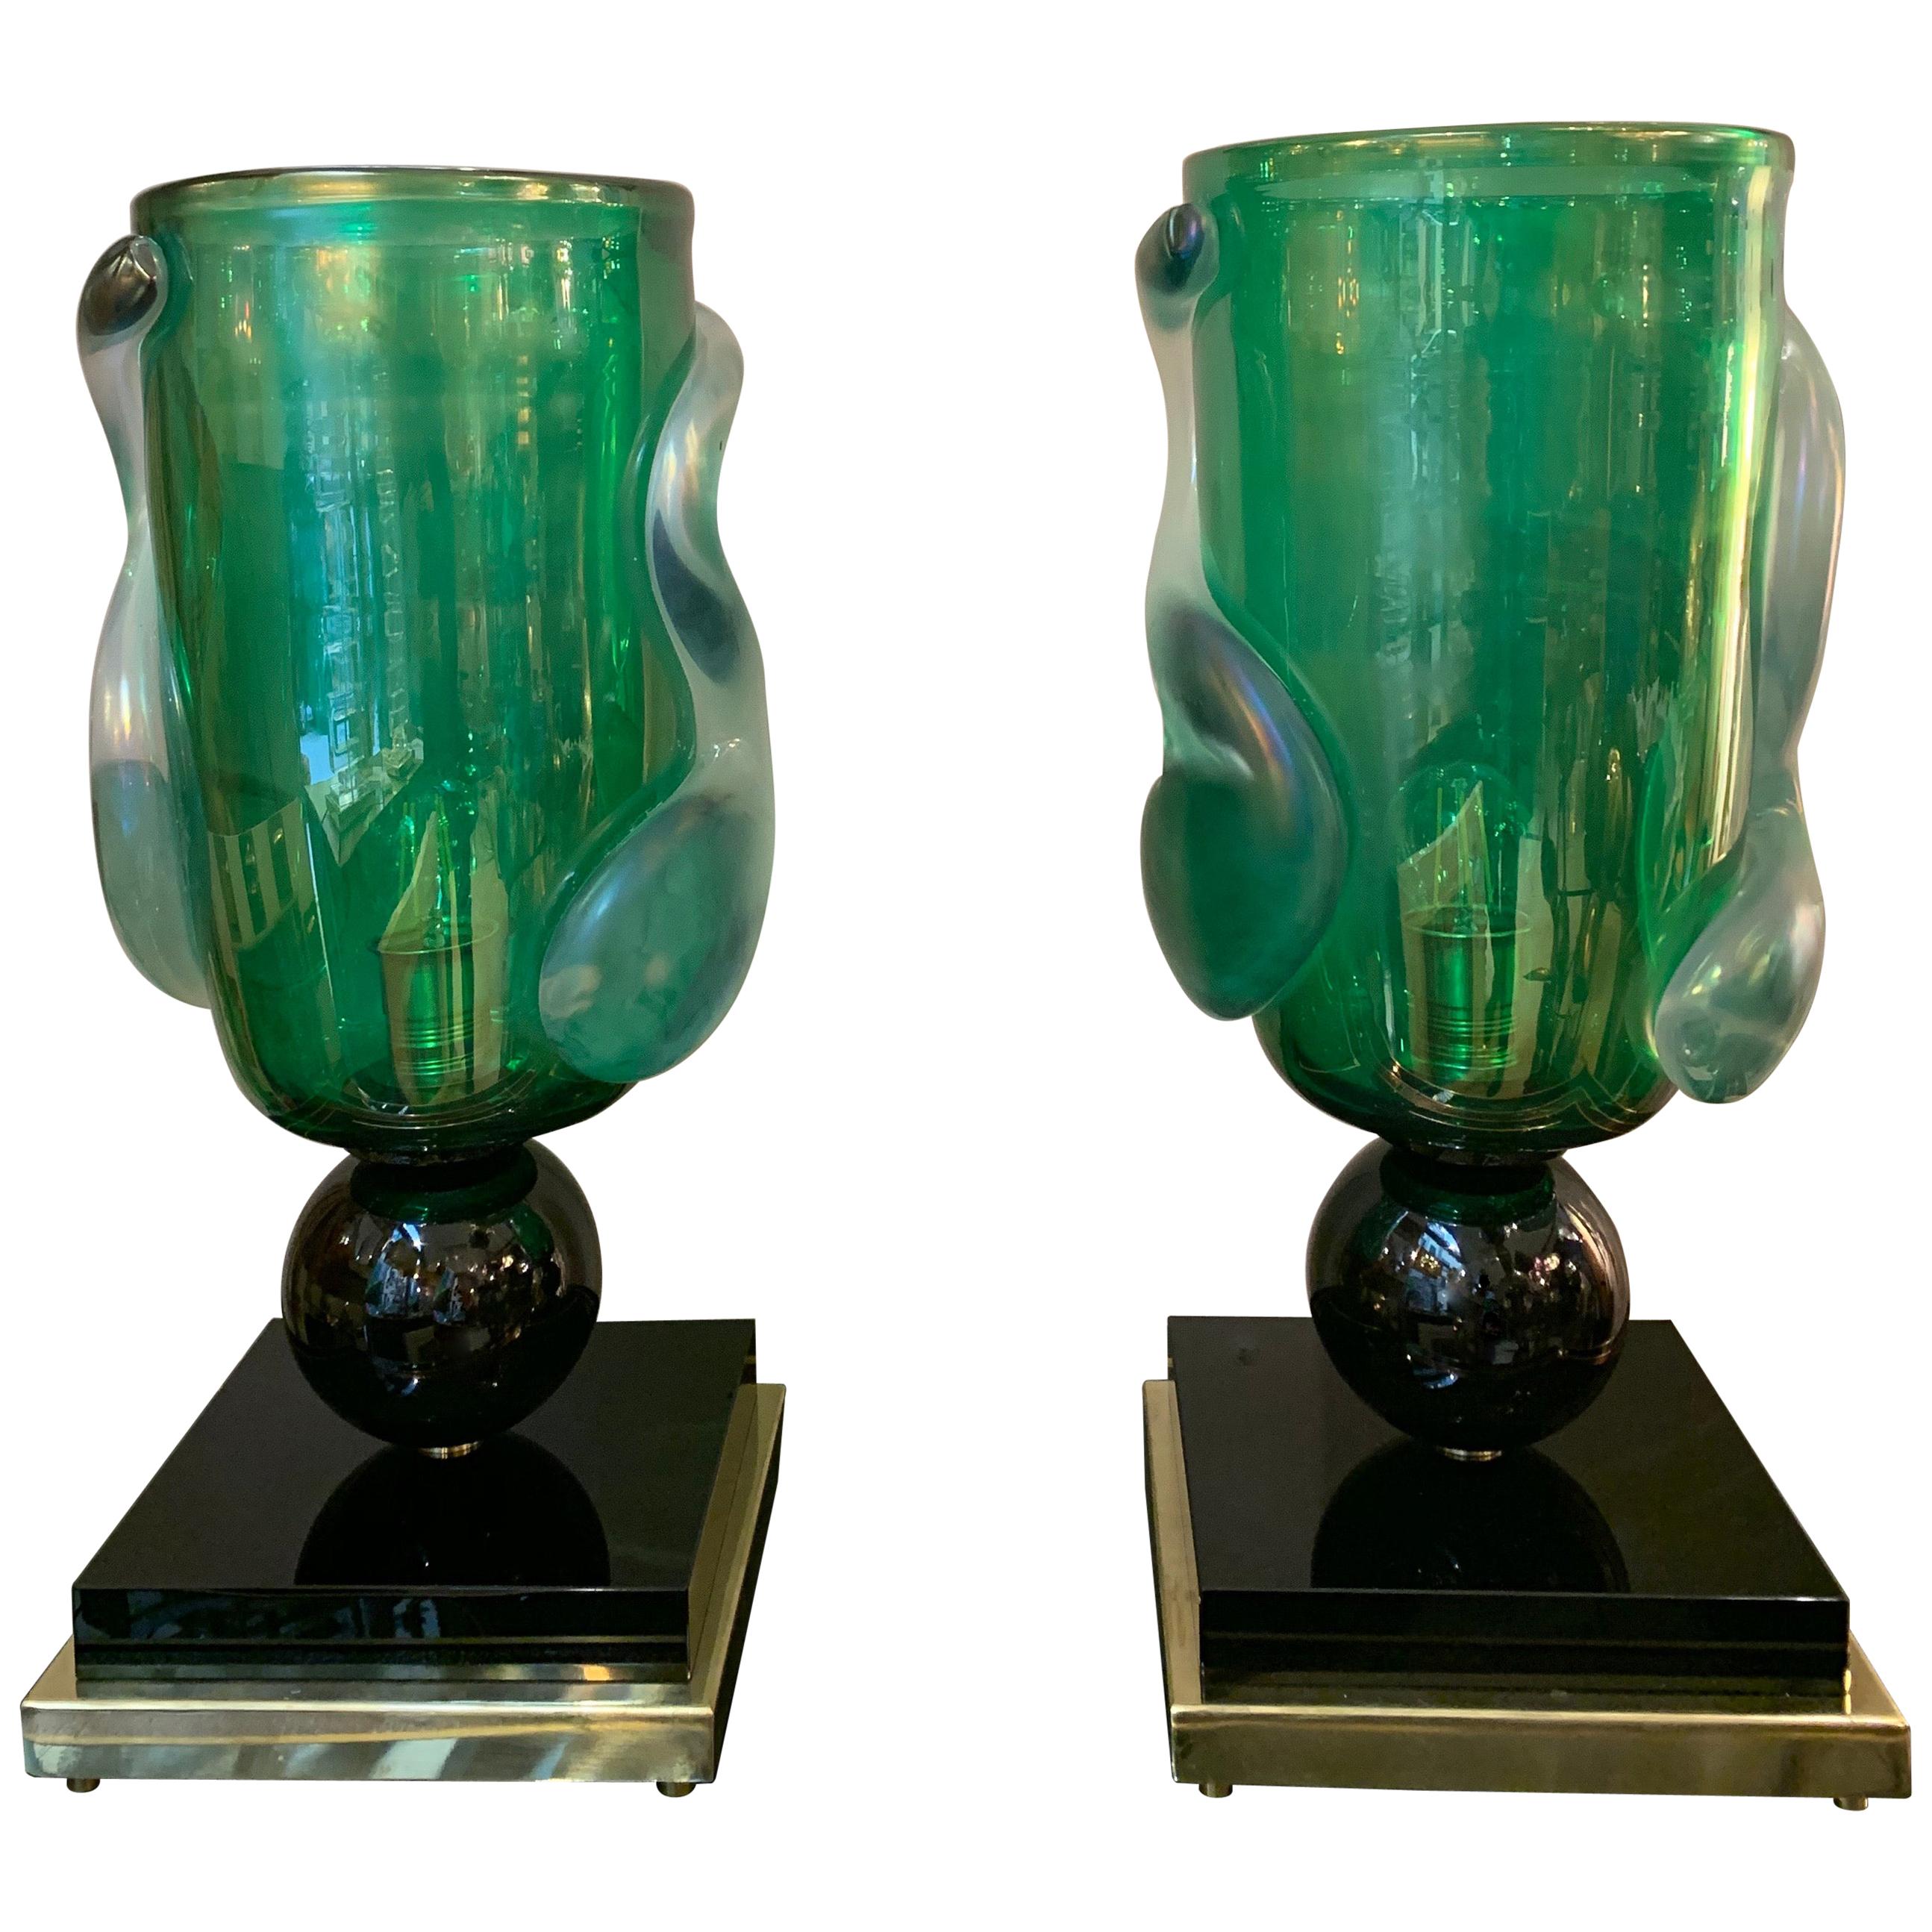 Pair of Green Murano Glass Table Lamps Signed by Costantini Murano, 1980s